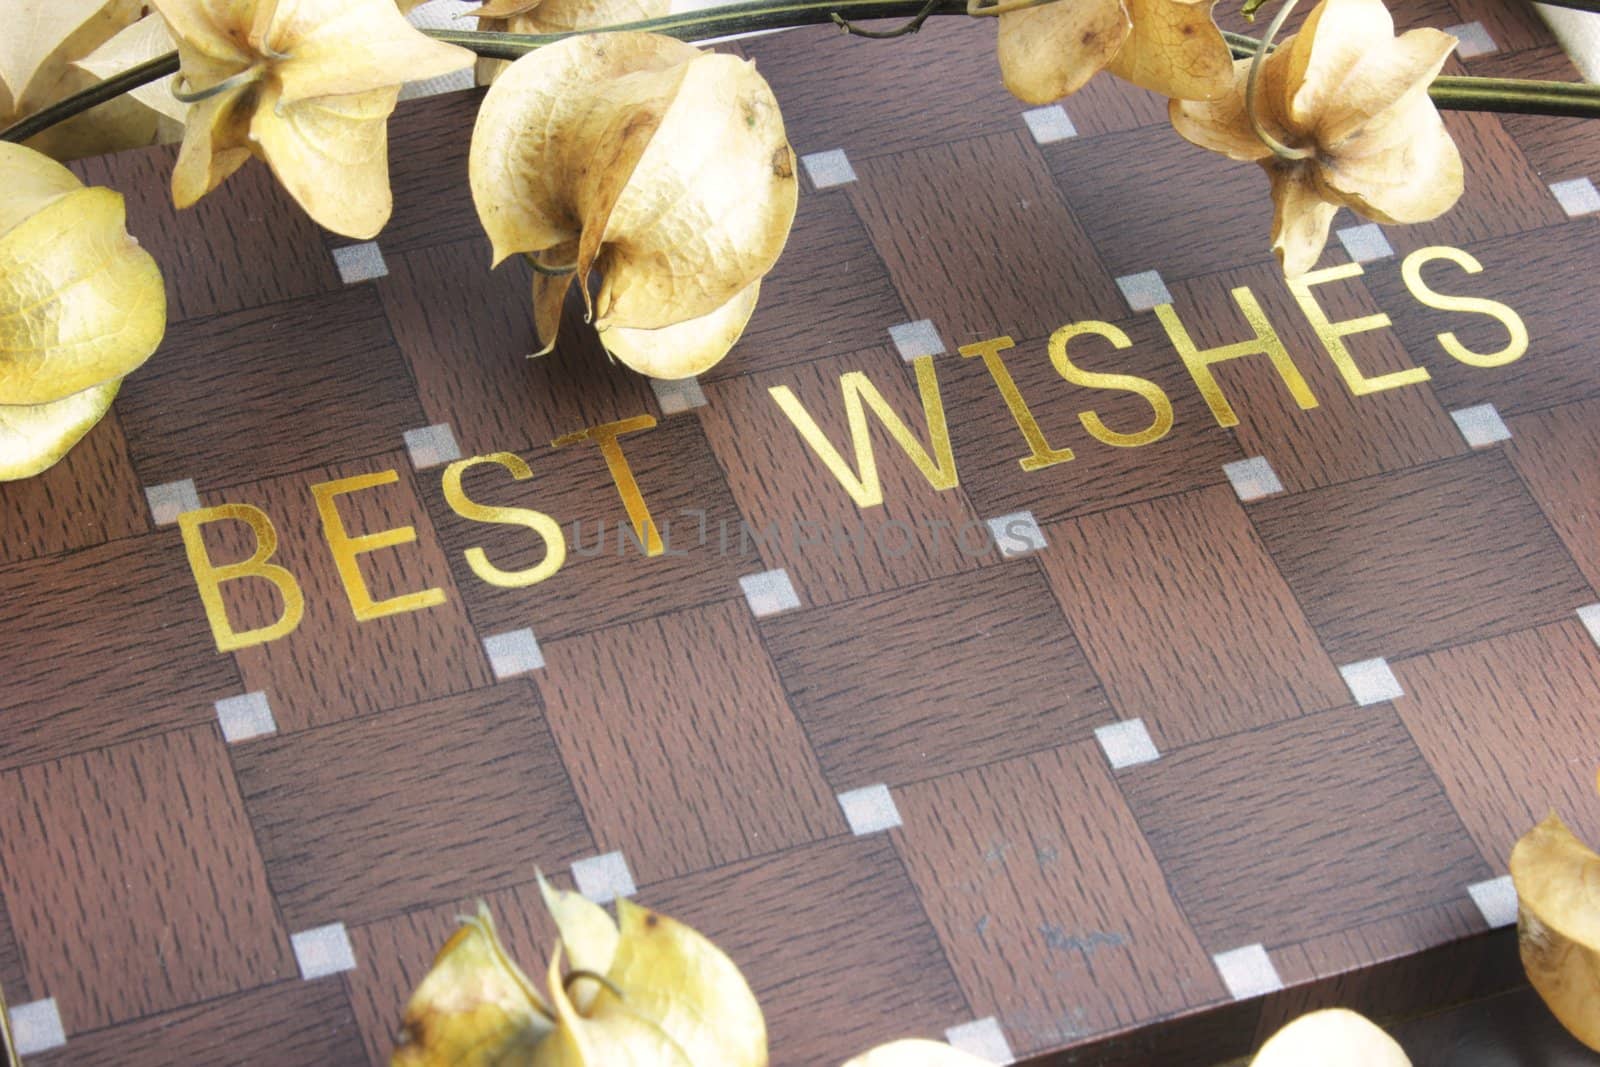 Best wishes inscribed on wooden checkerboard box, placed amidst dried cape gooseberries